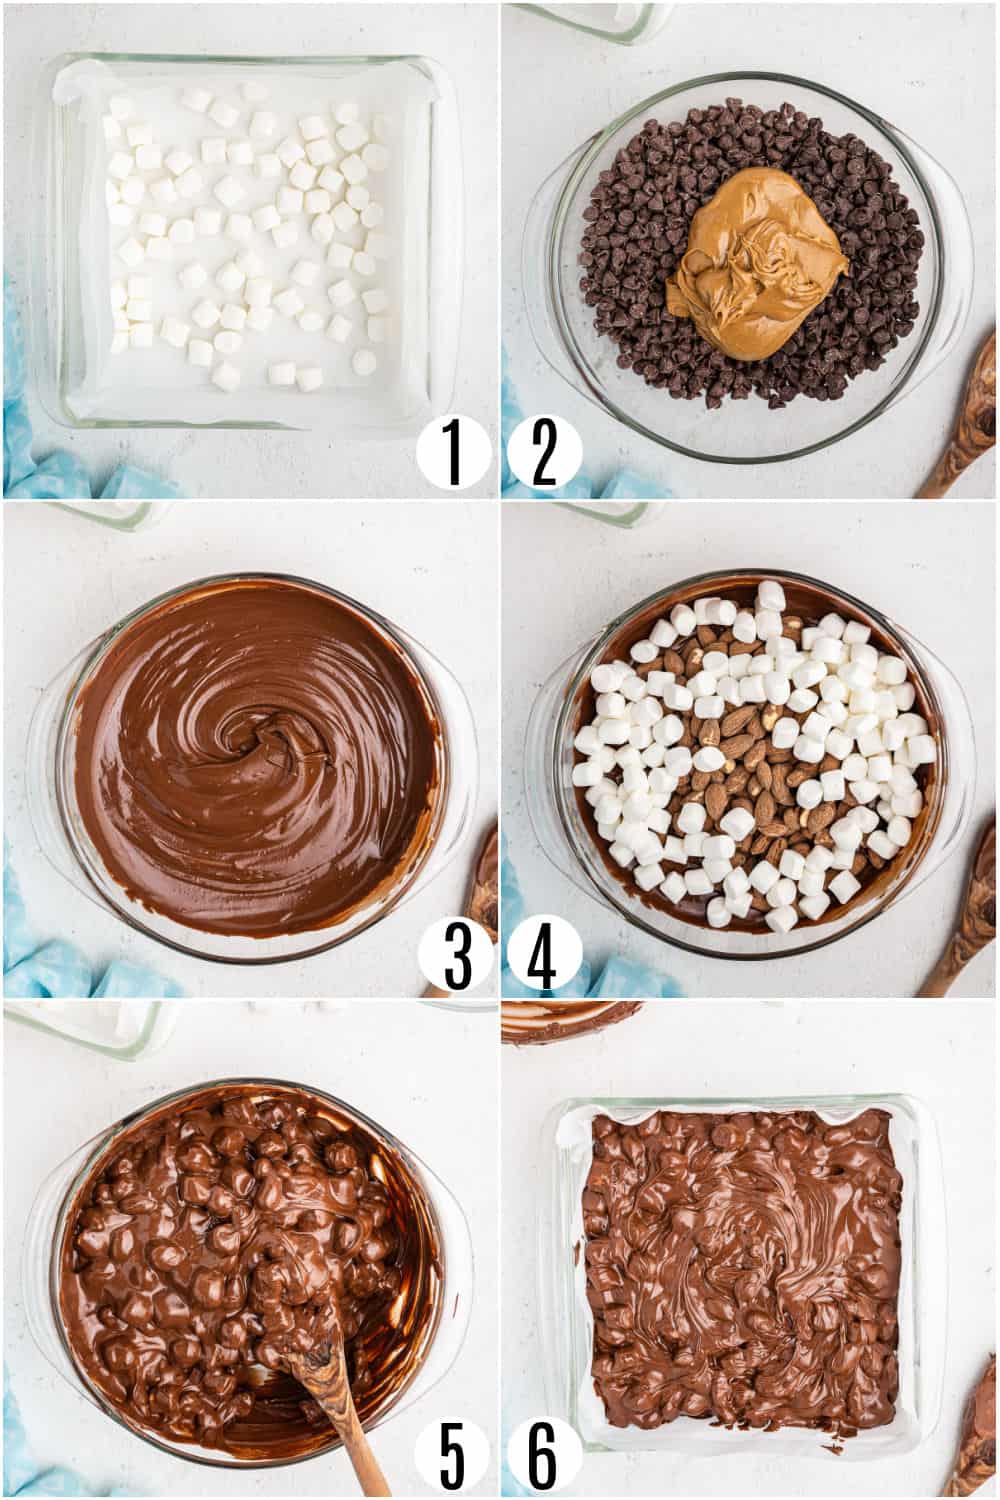 Step by step photos showing how to make rocky road fudge.